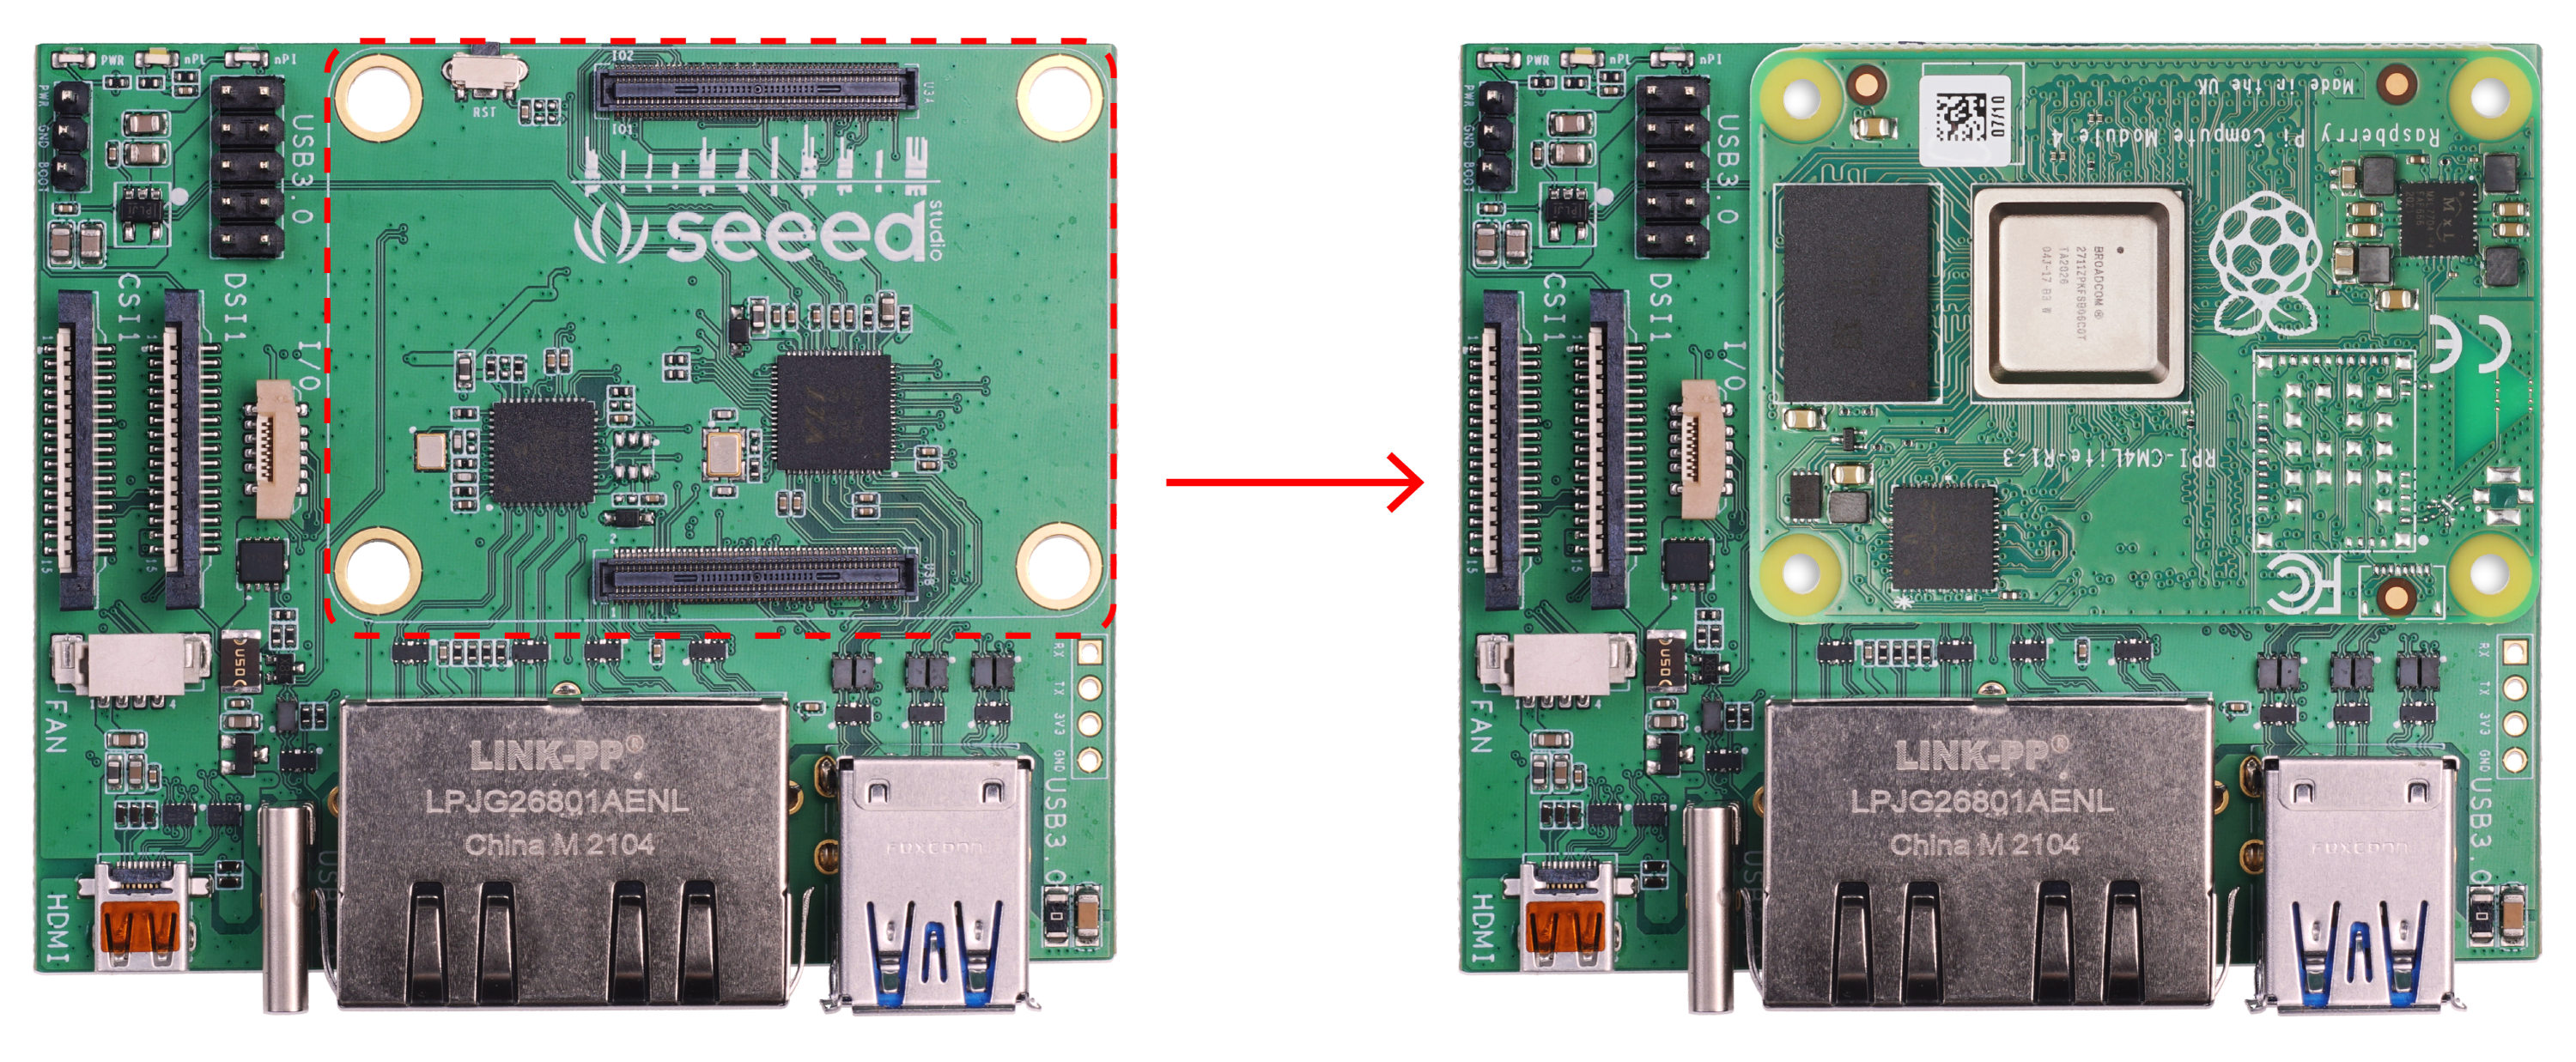 Seeed Studio’s Dual Gigabit Ethernet Carrier Board Brings The CM4 To Router Projects